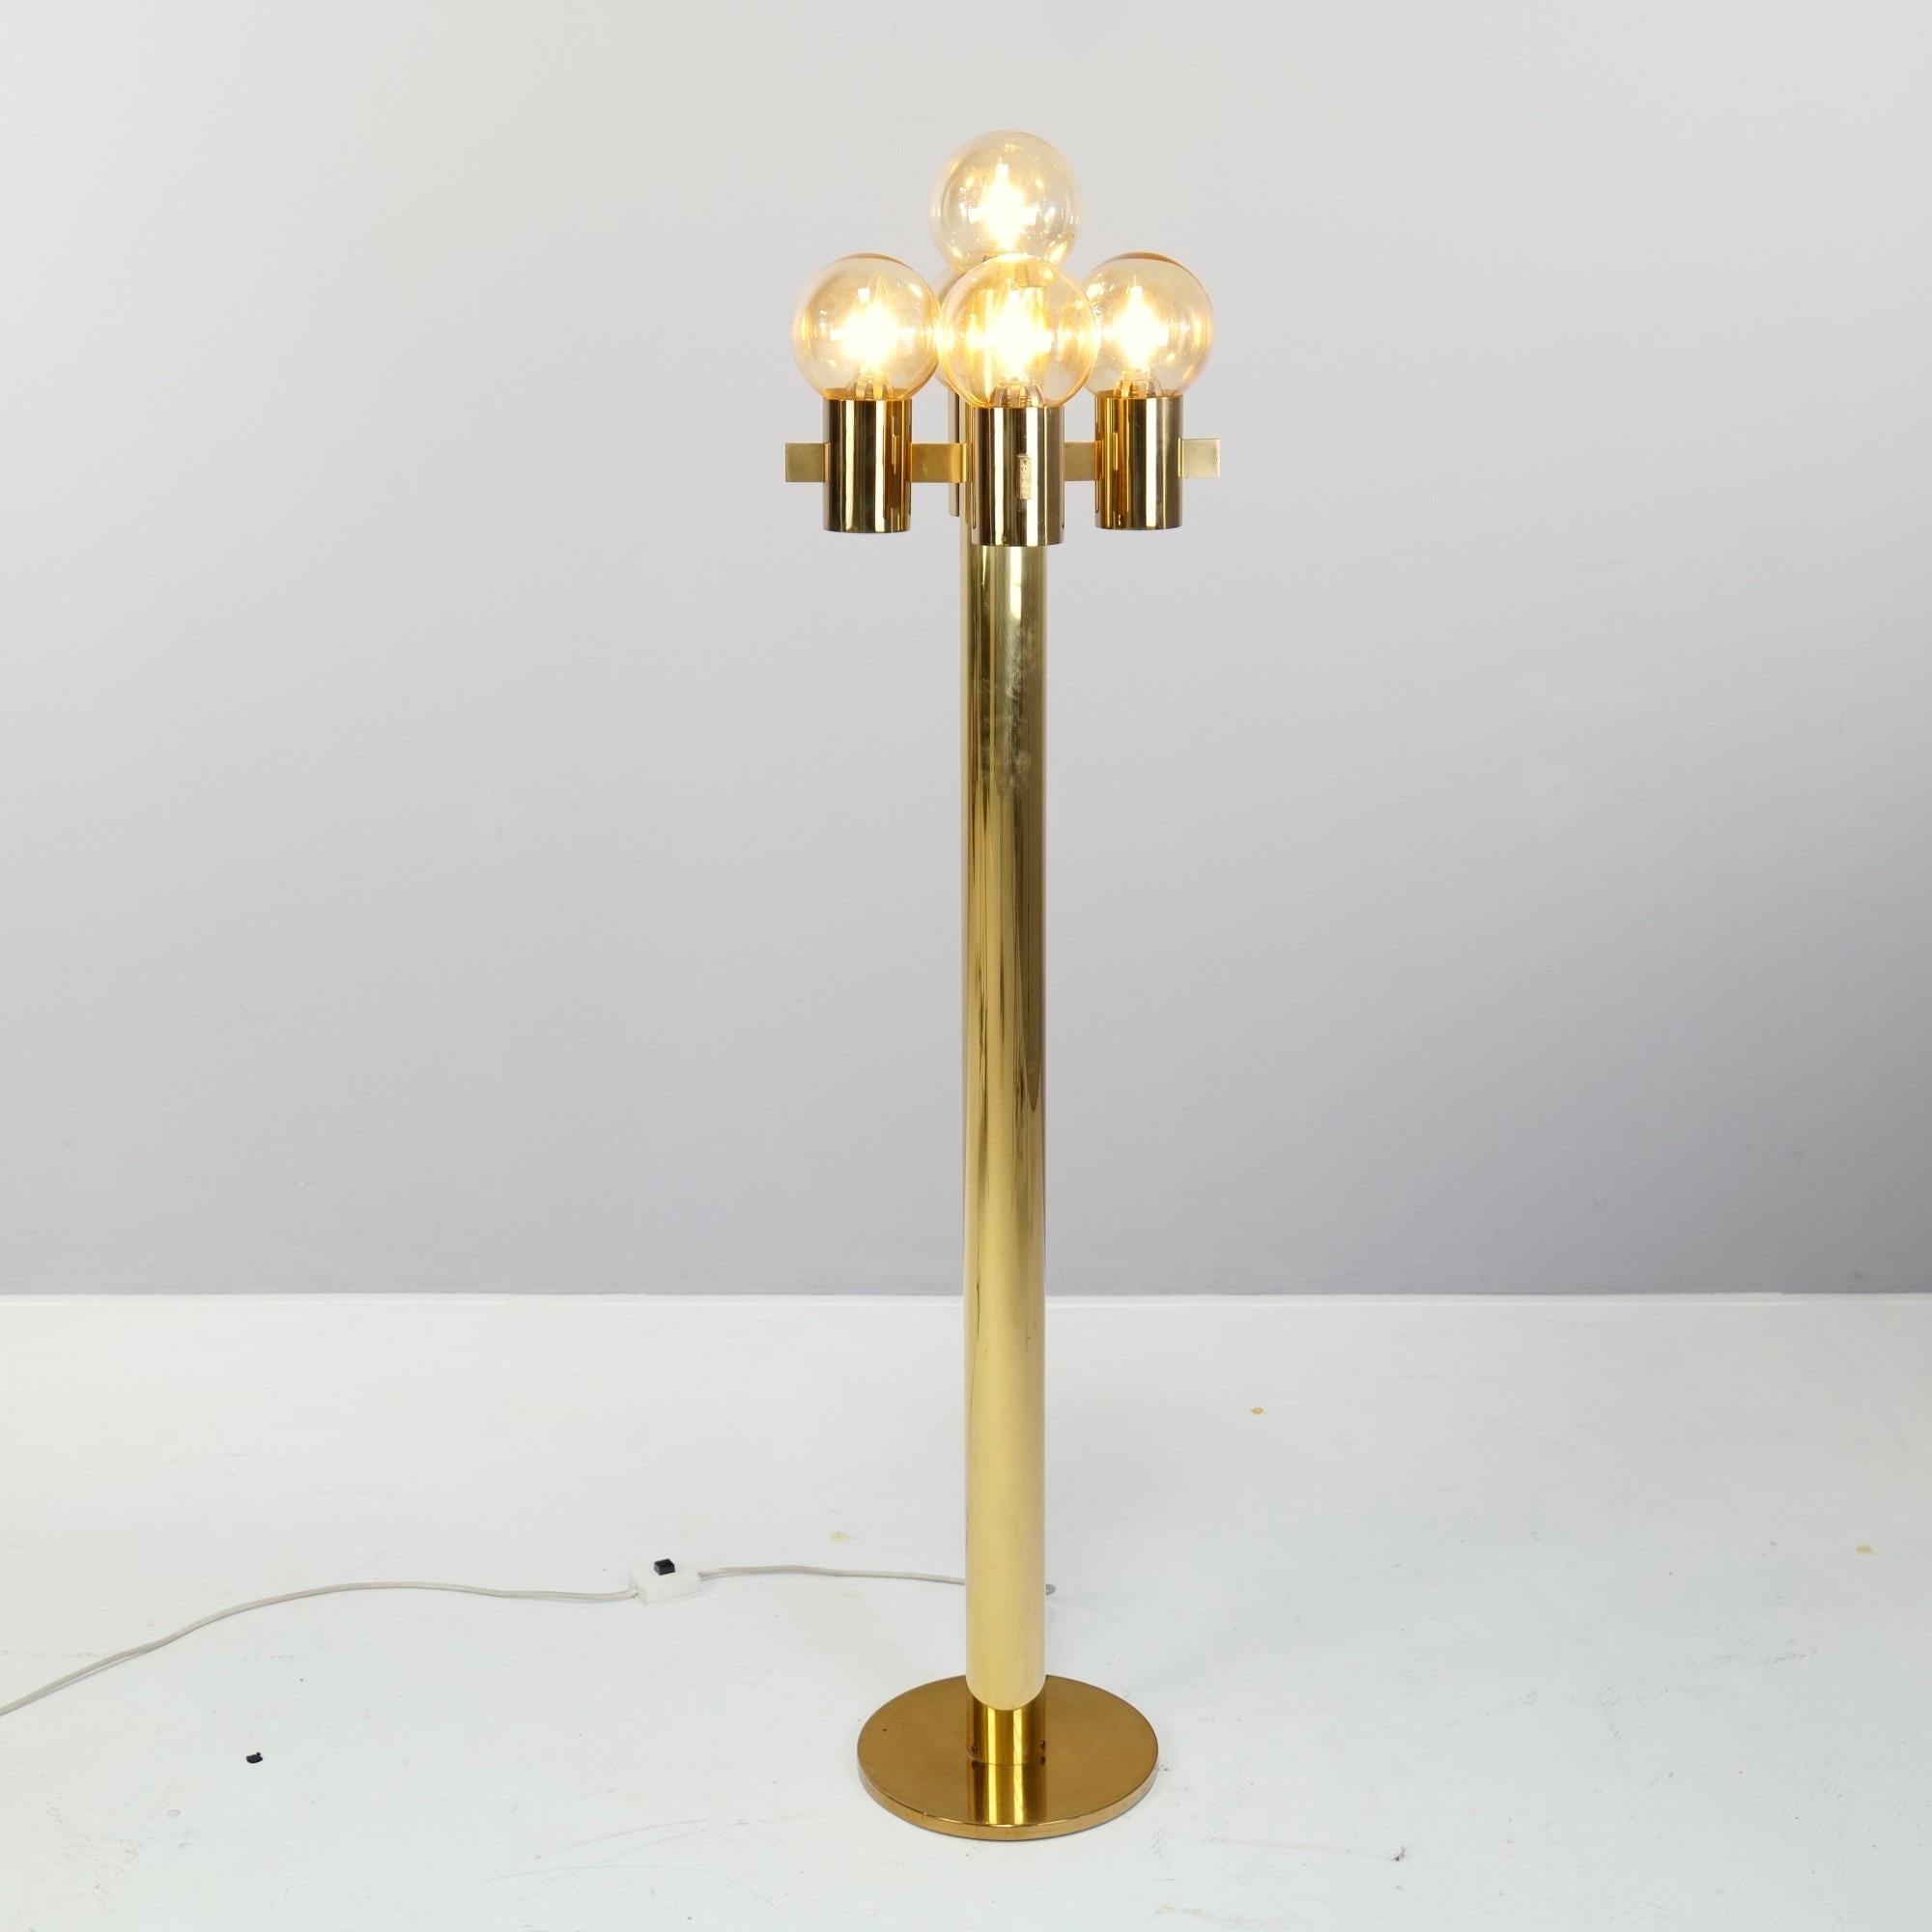 Stunning golden floor lamp by Gaetano Sciolari with 5 murano glass bulbs.

Very good condition with slight signs of patina and use.

1970's Made in Italy

dimensions:
139 cm heigh
33 cm width
33 cm depth

materials:
brass, murano glass.